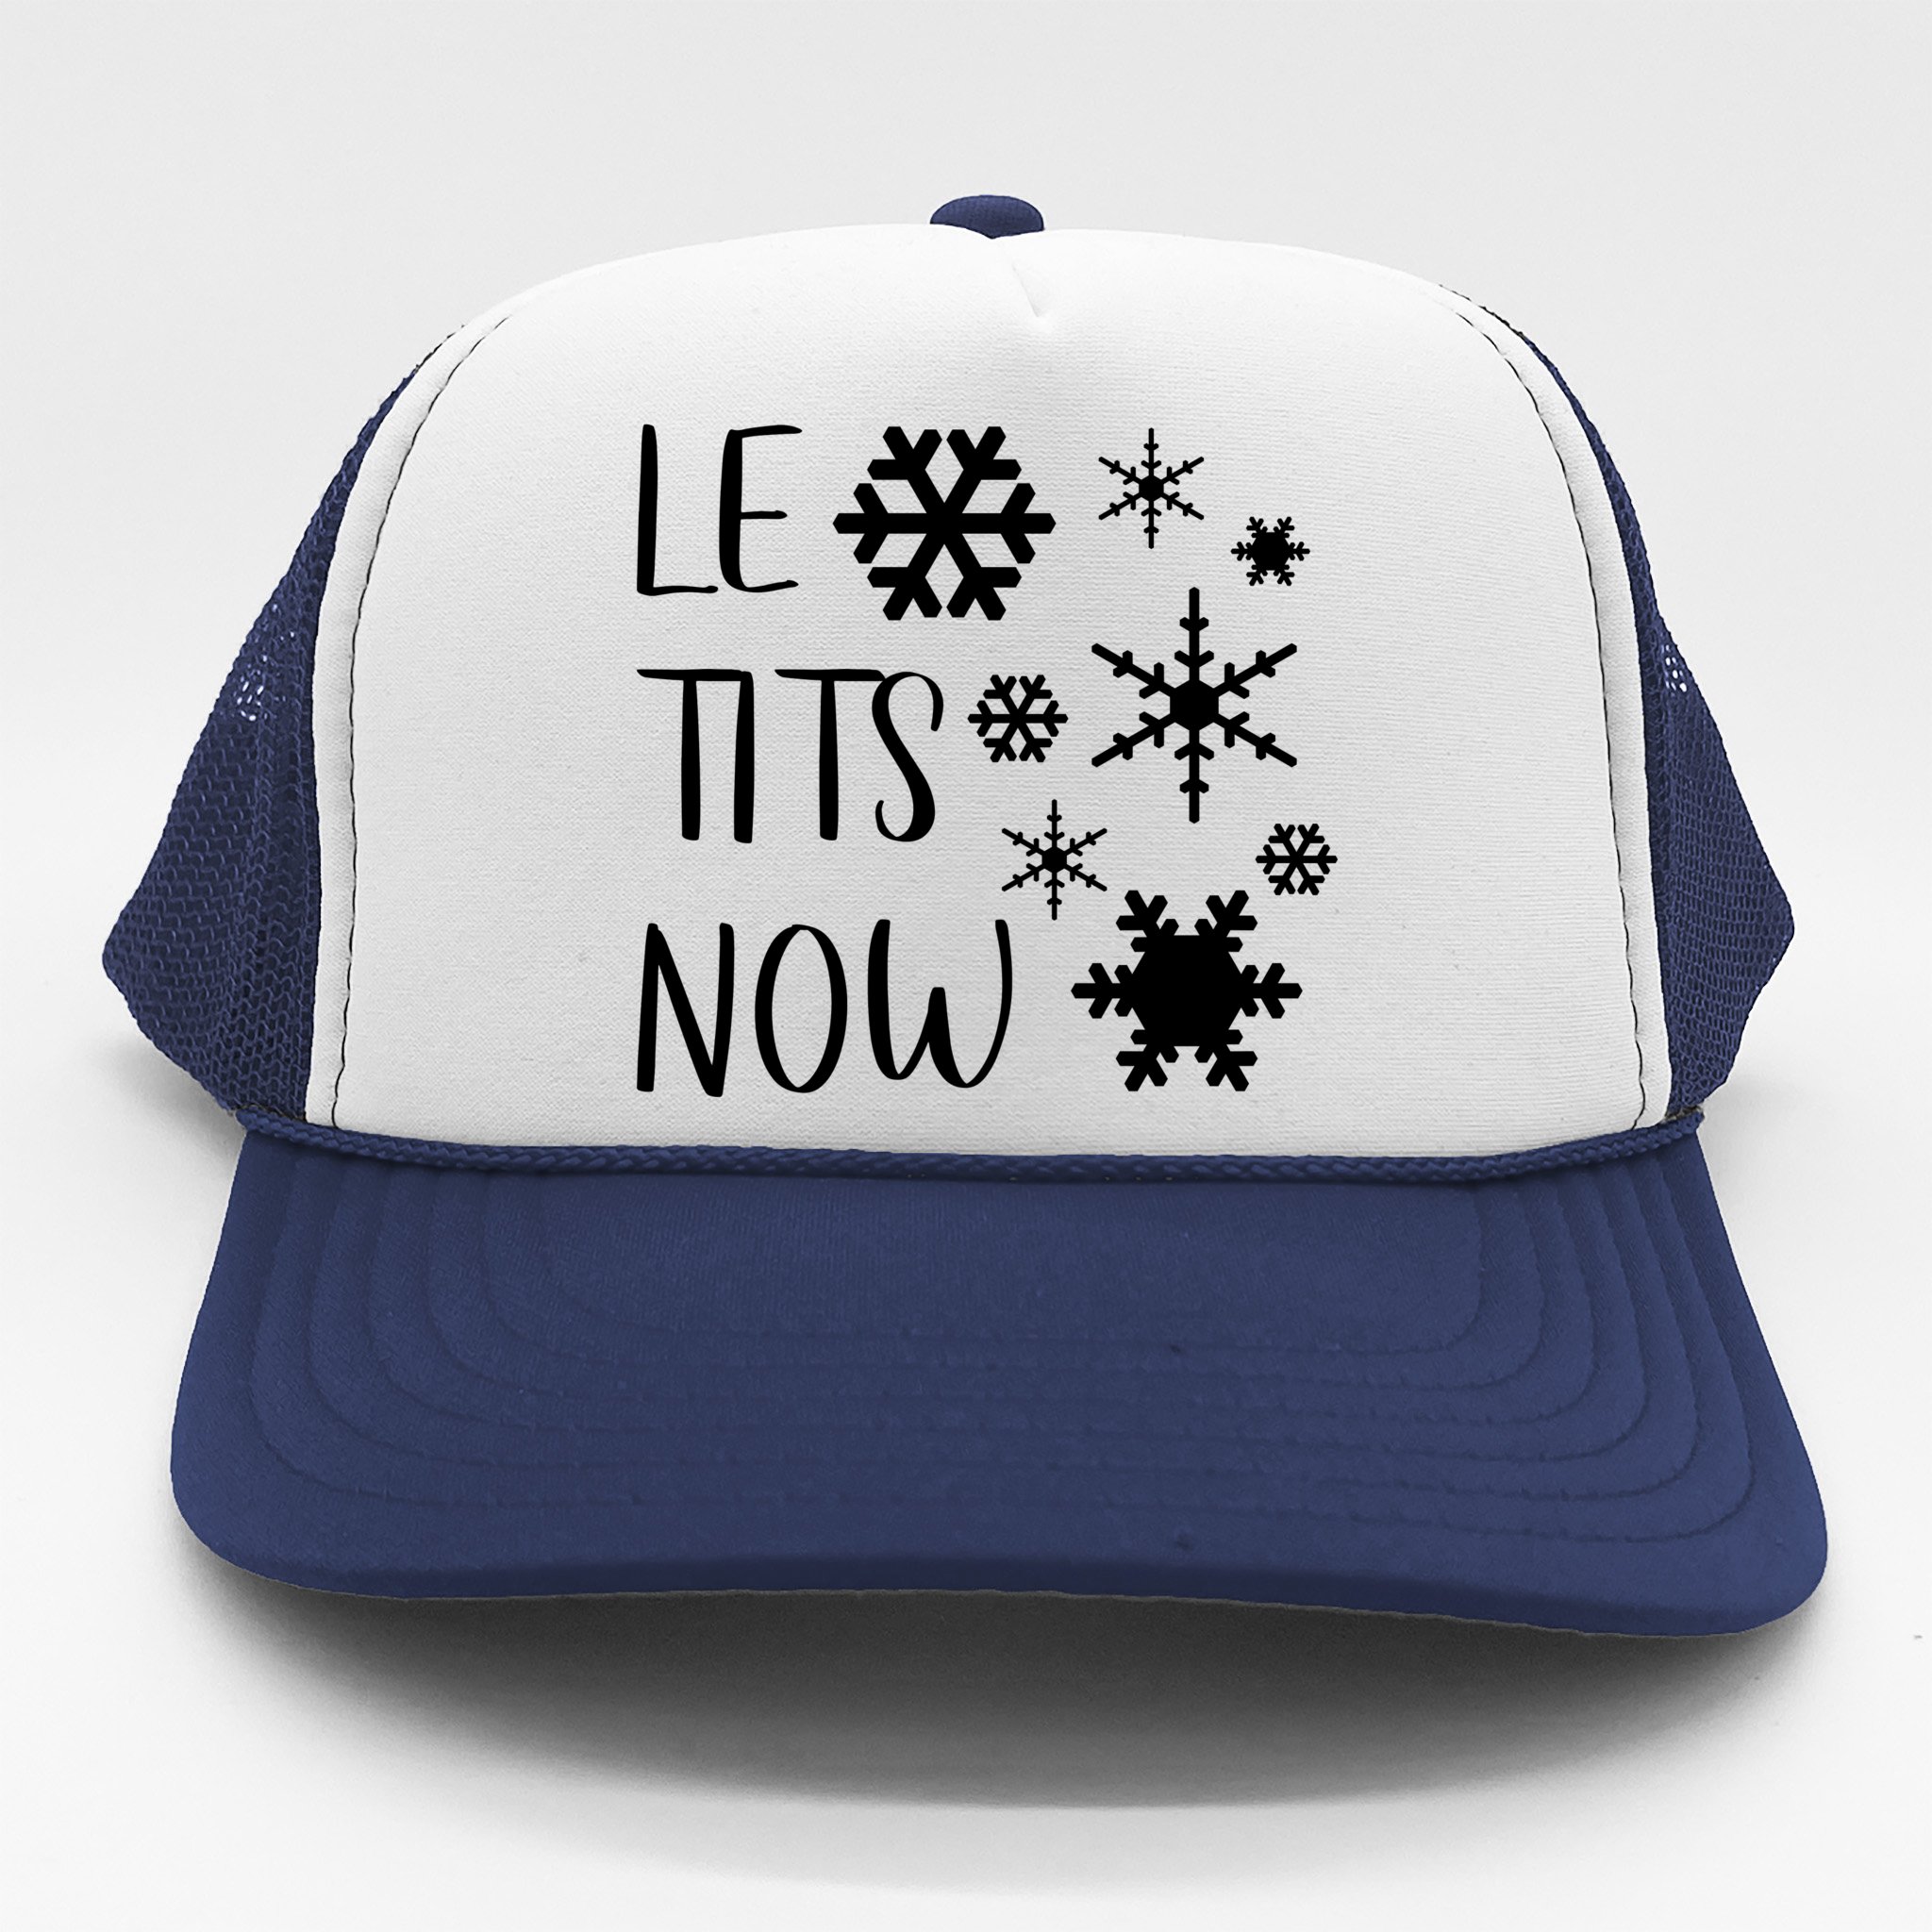 Le Tits Now Gift Let It Snow Gift Humor Christmas Gift Trucker Hat